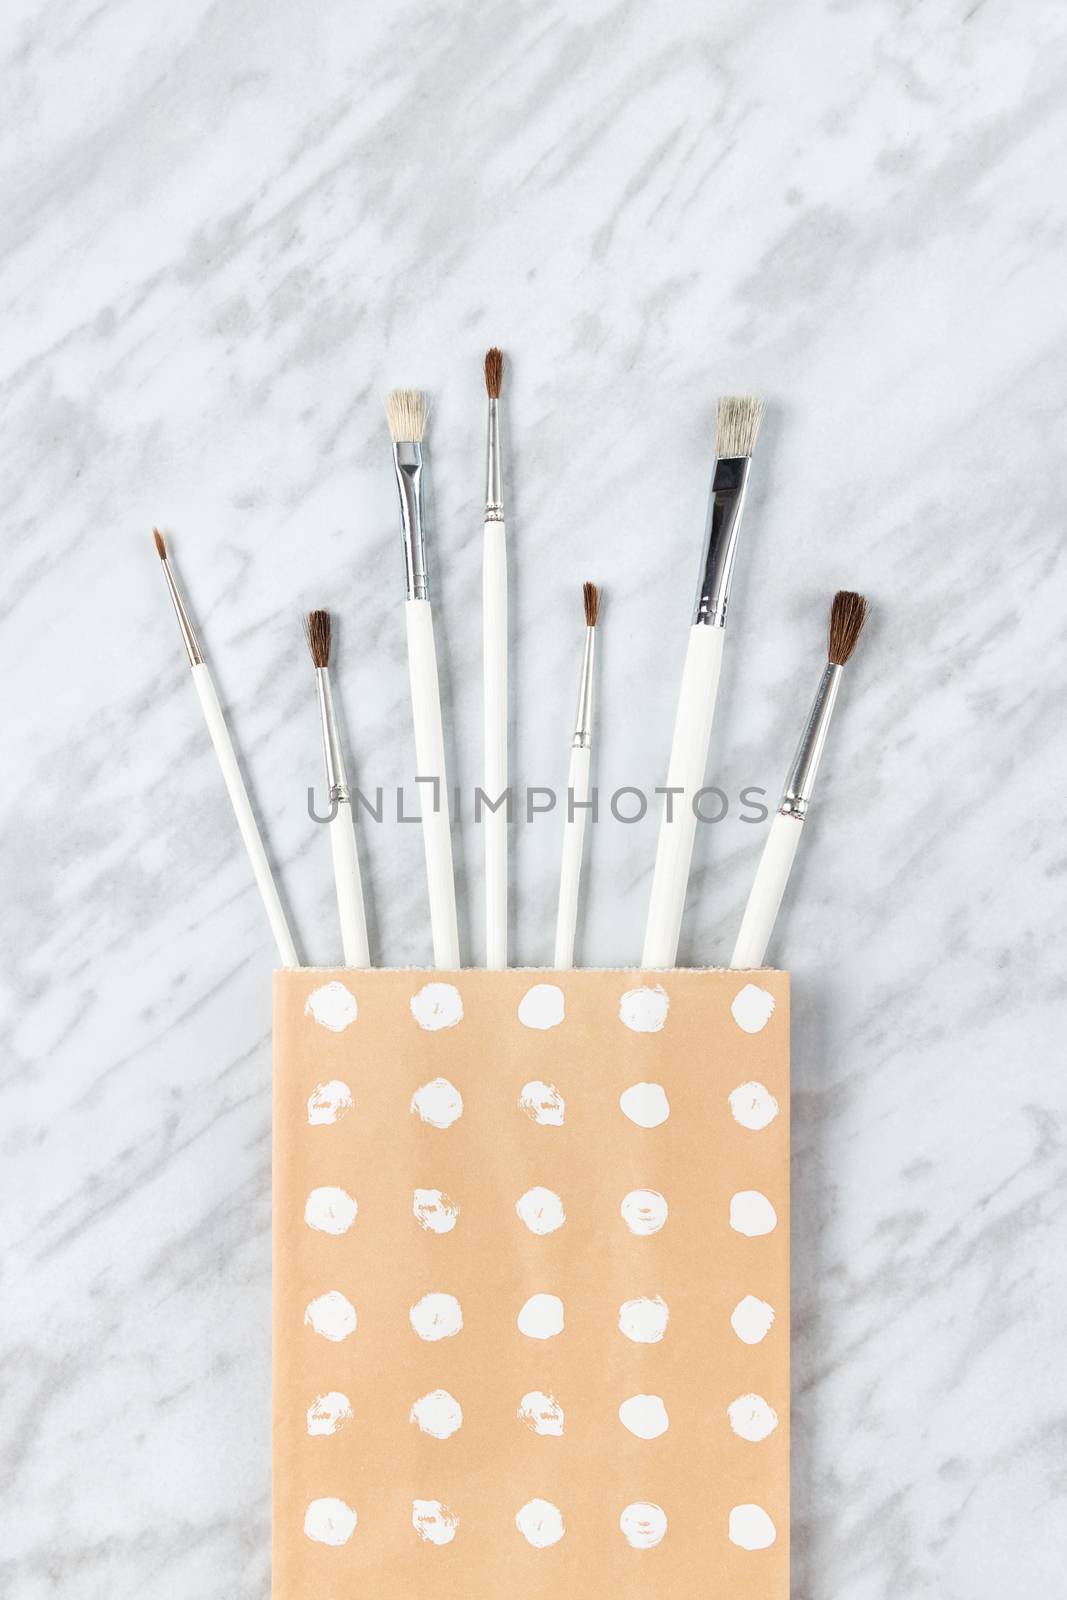 Paint brushes in a paper bag with white circles painted on it, on marble background.